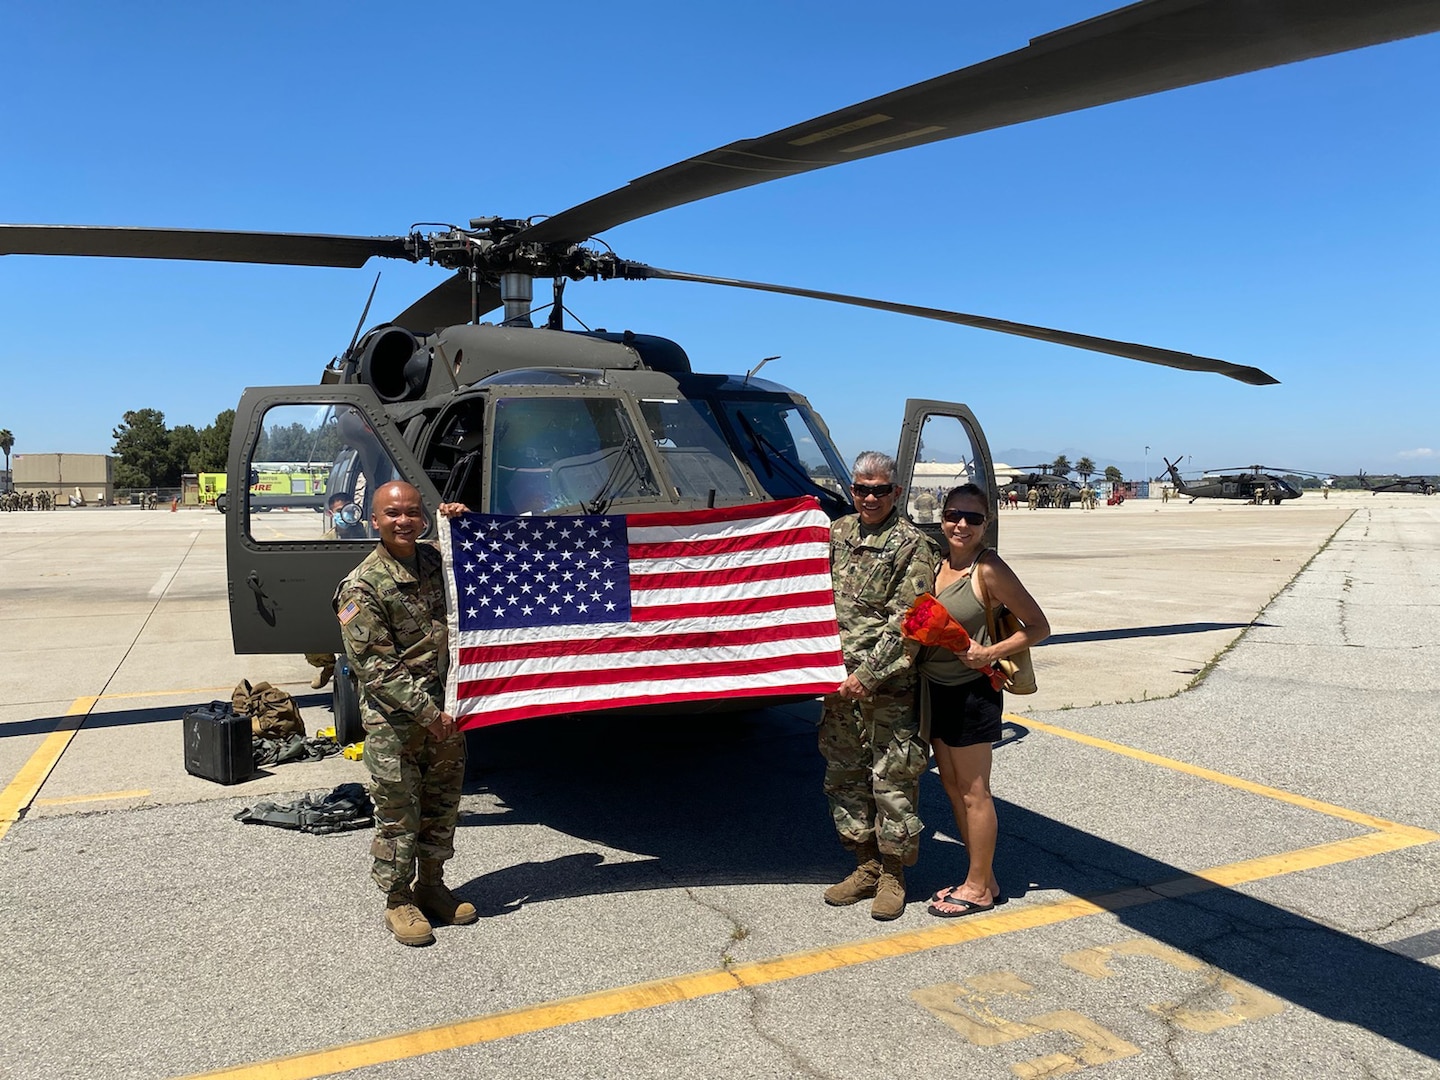 Three people stand in front of a helicopter holding an American flag